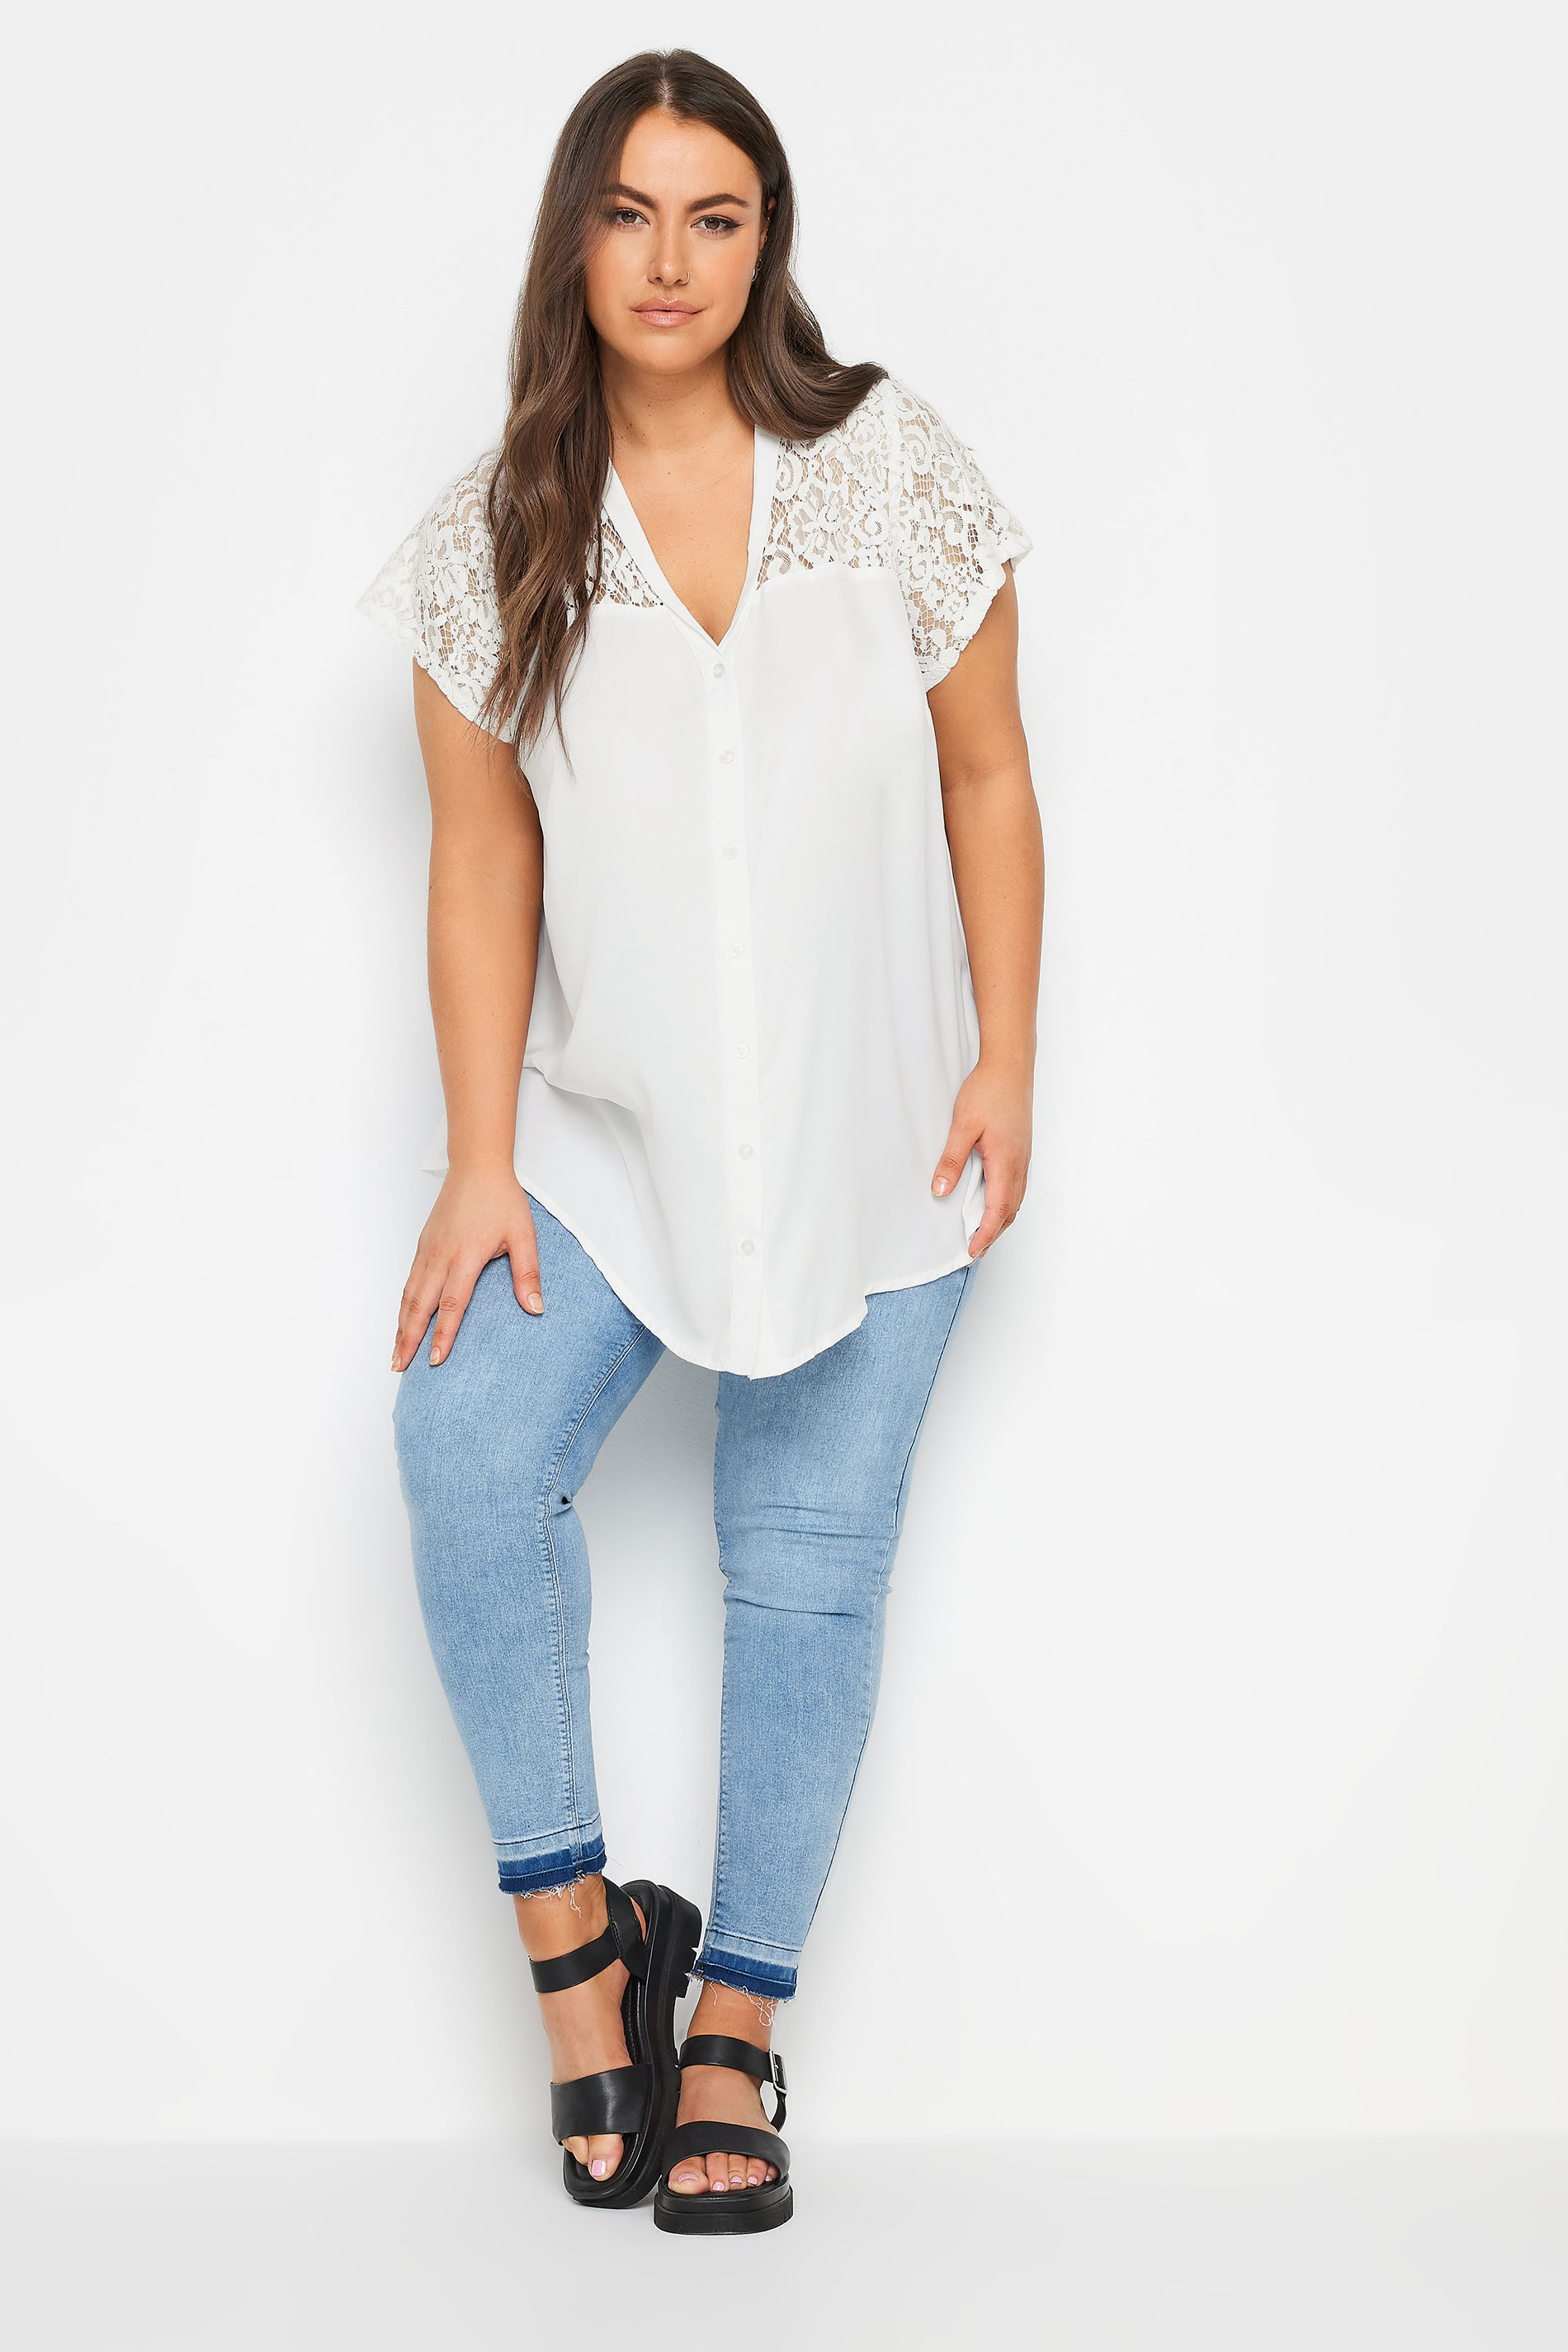 LIMITED COLLECTION Plus Size White Lace Insert Blouse